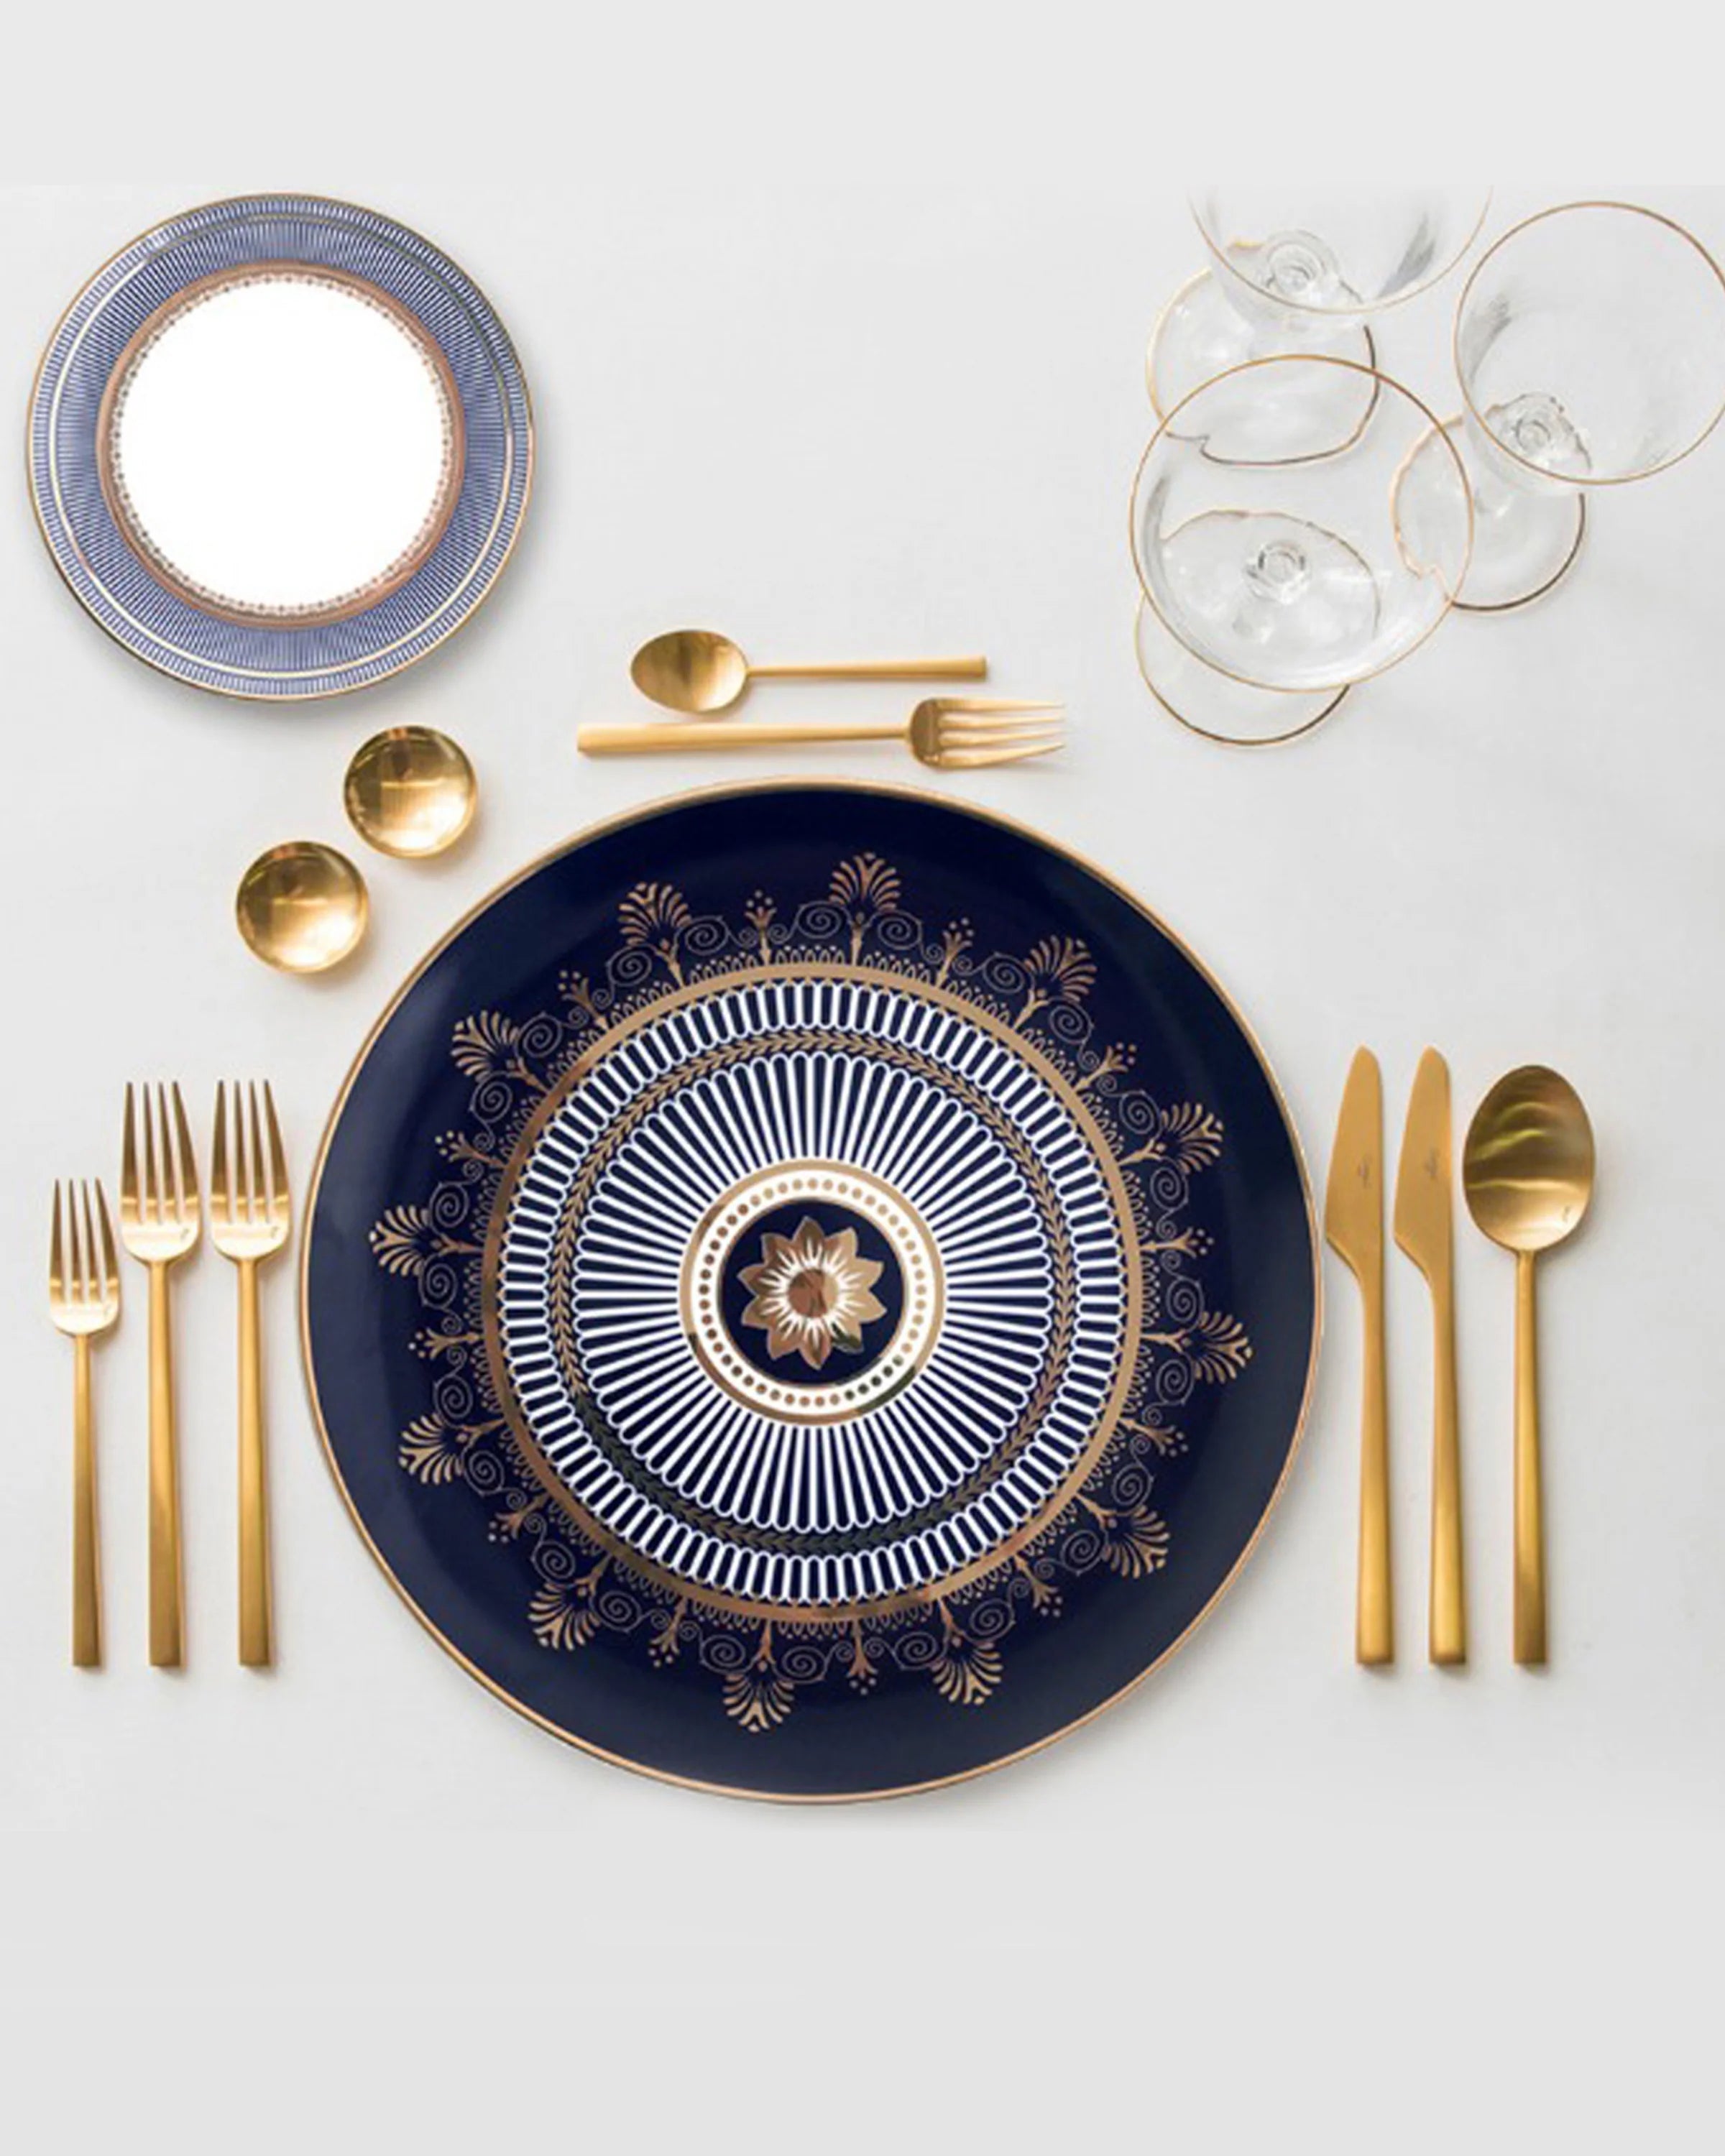 How to Use Tableware to Create a Memorable Dining Experience